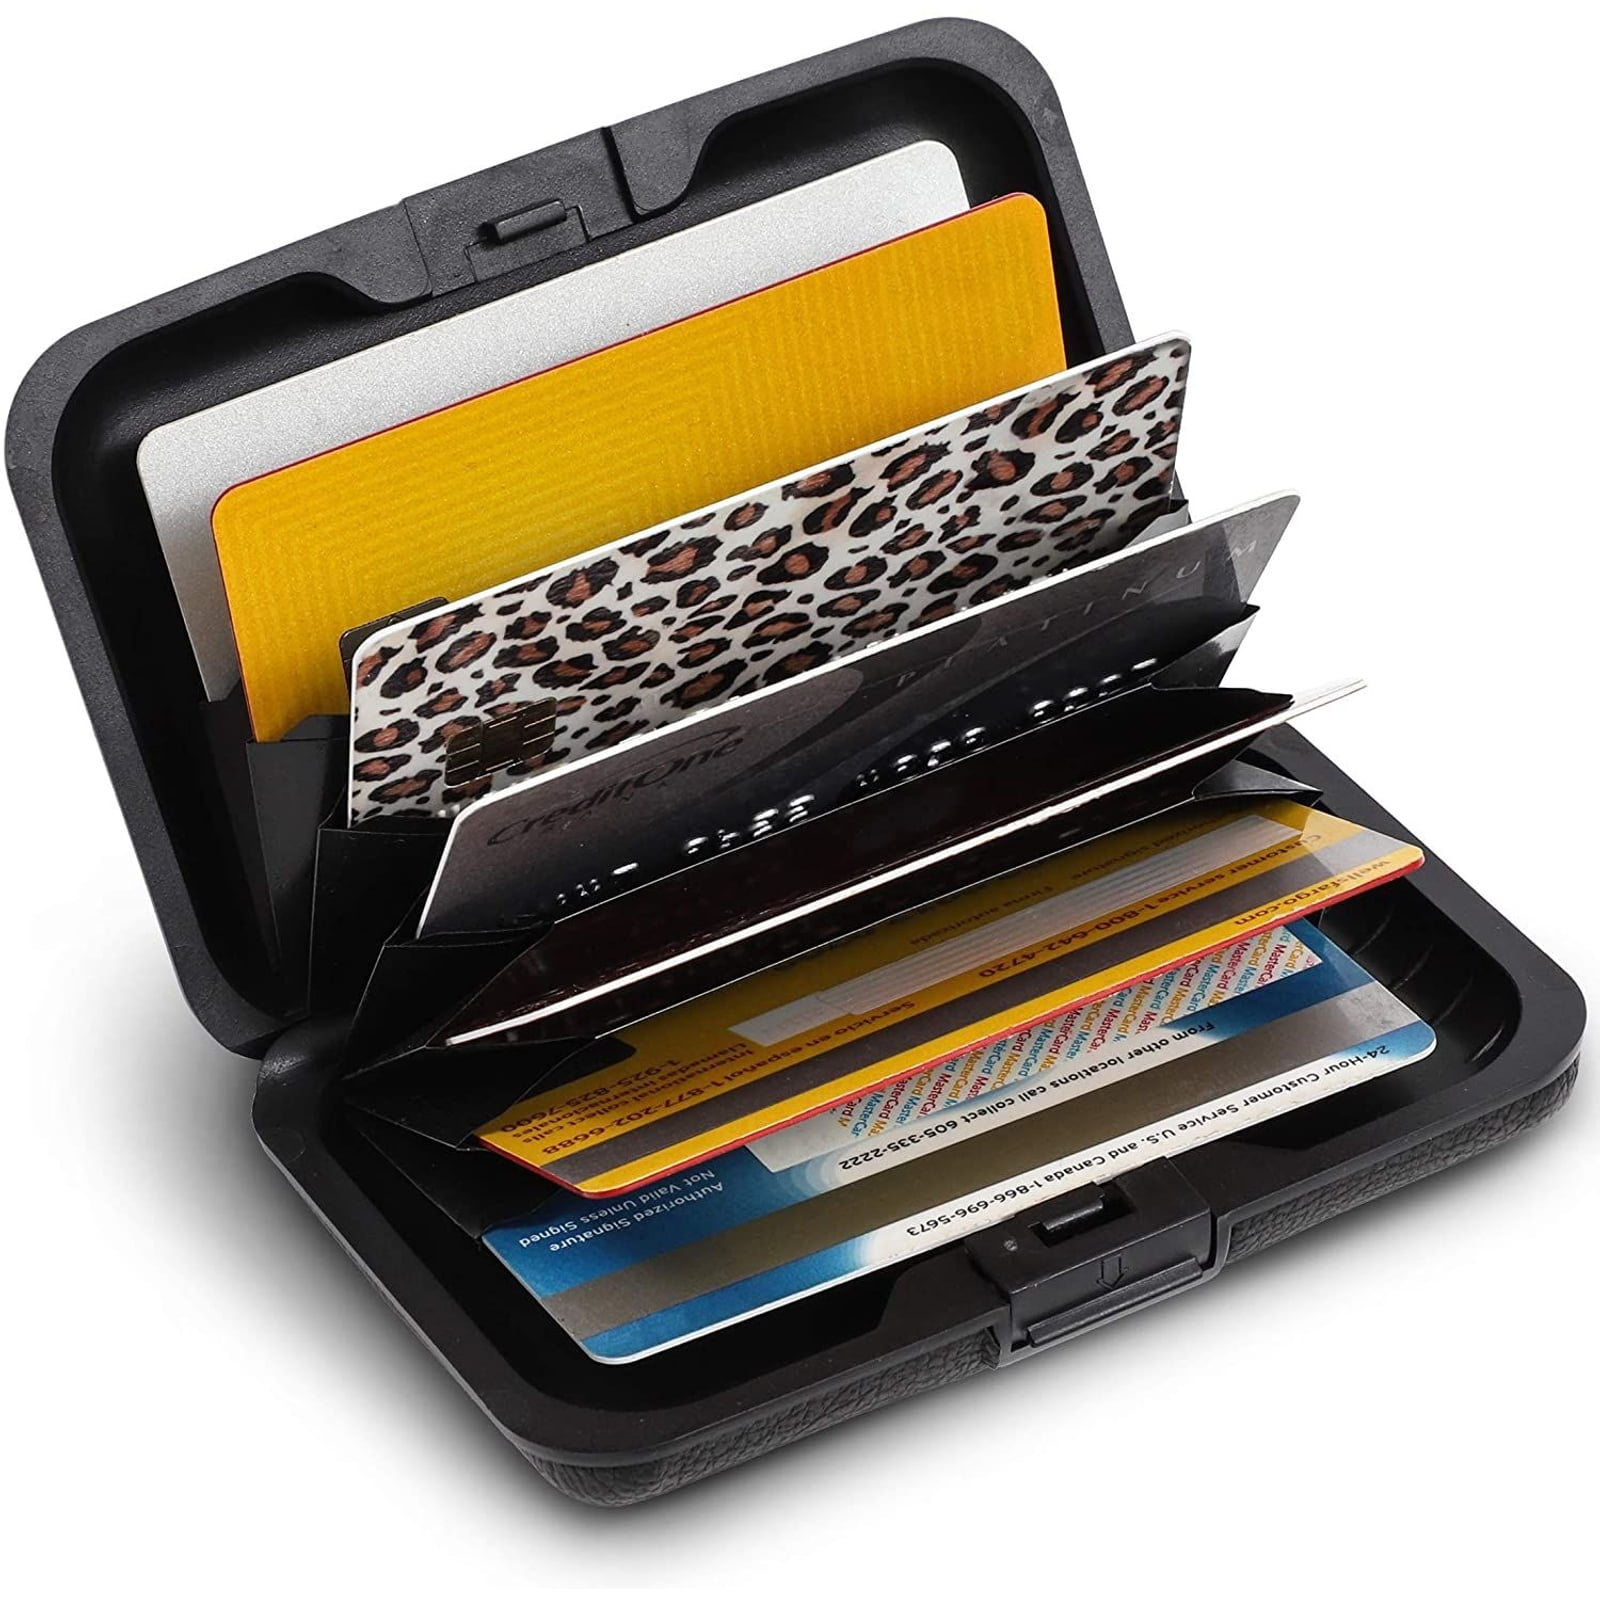 MEET ME Mens and Womens Reflective Laser Wallet Gold Can be Used to Store Bank Cards Slim RFID Blocking Multi-Function Card Holder Very Suitable for Travel. Bank Notes and Passports